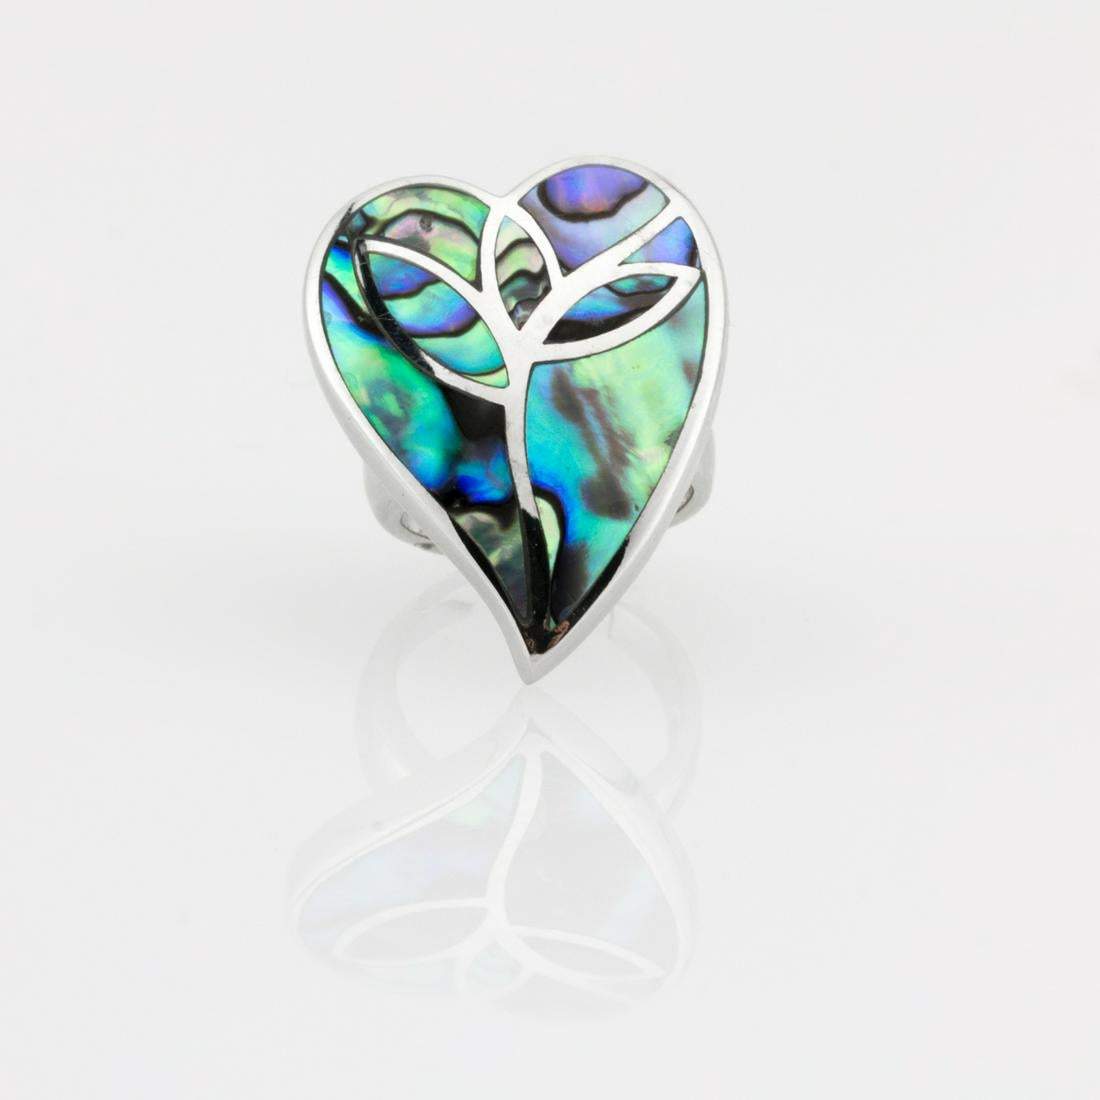 Silver Freeform Abalone Heart Inlay Ring Size 5 - Shop Thrifty Treasures